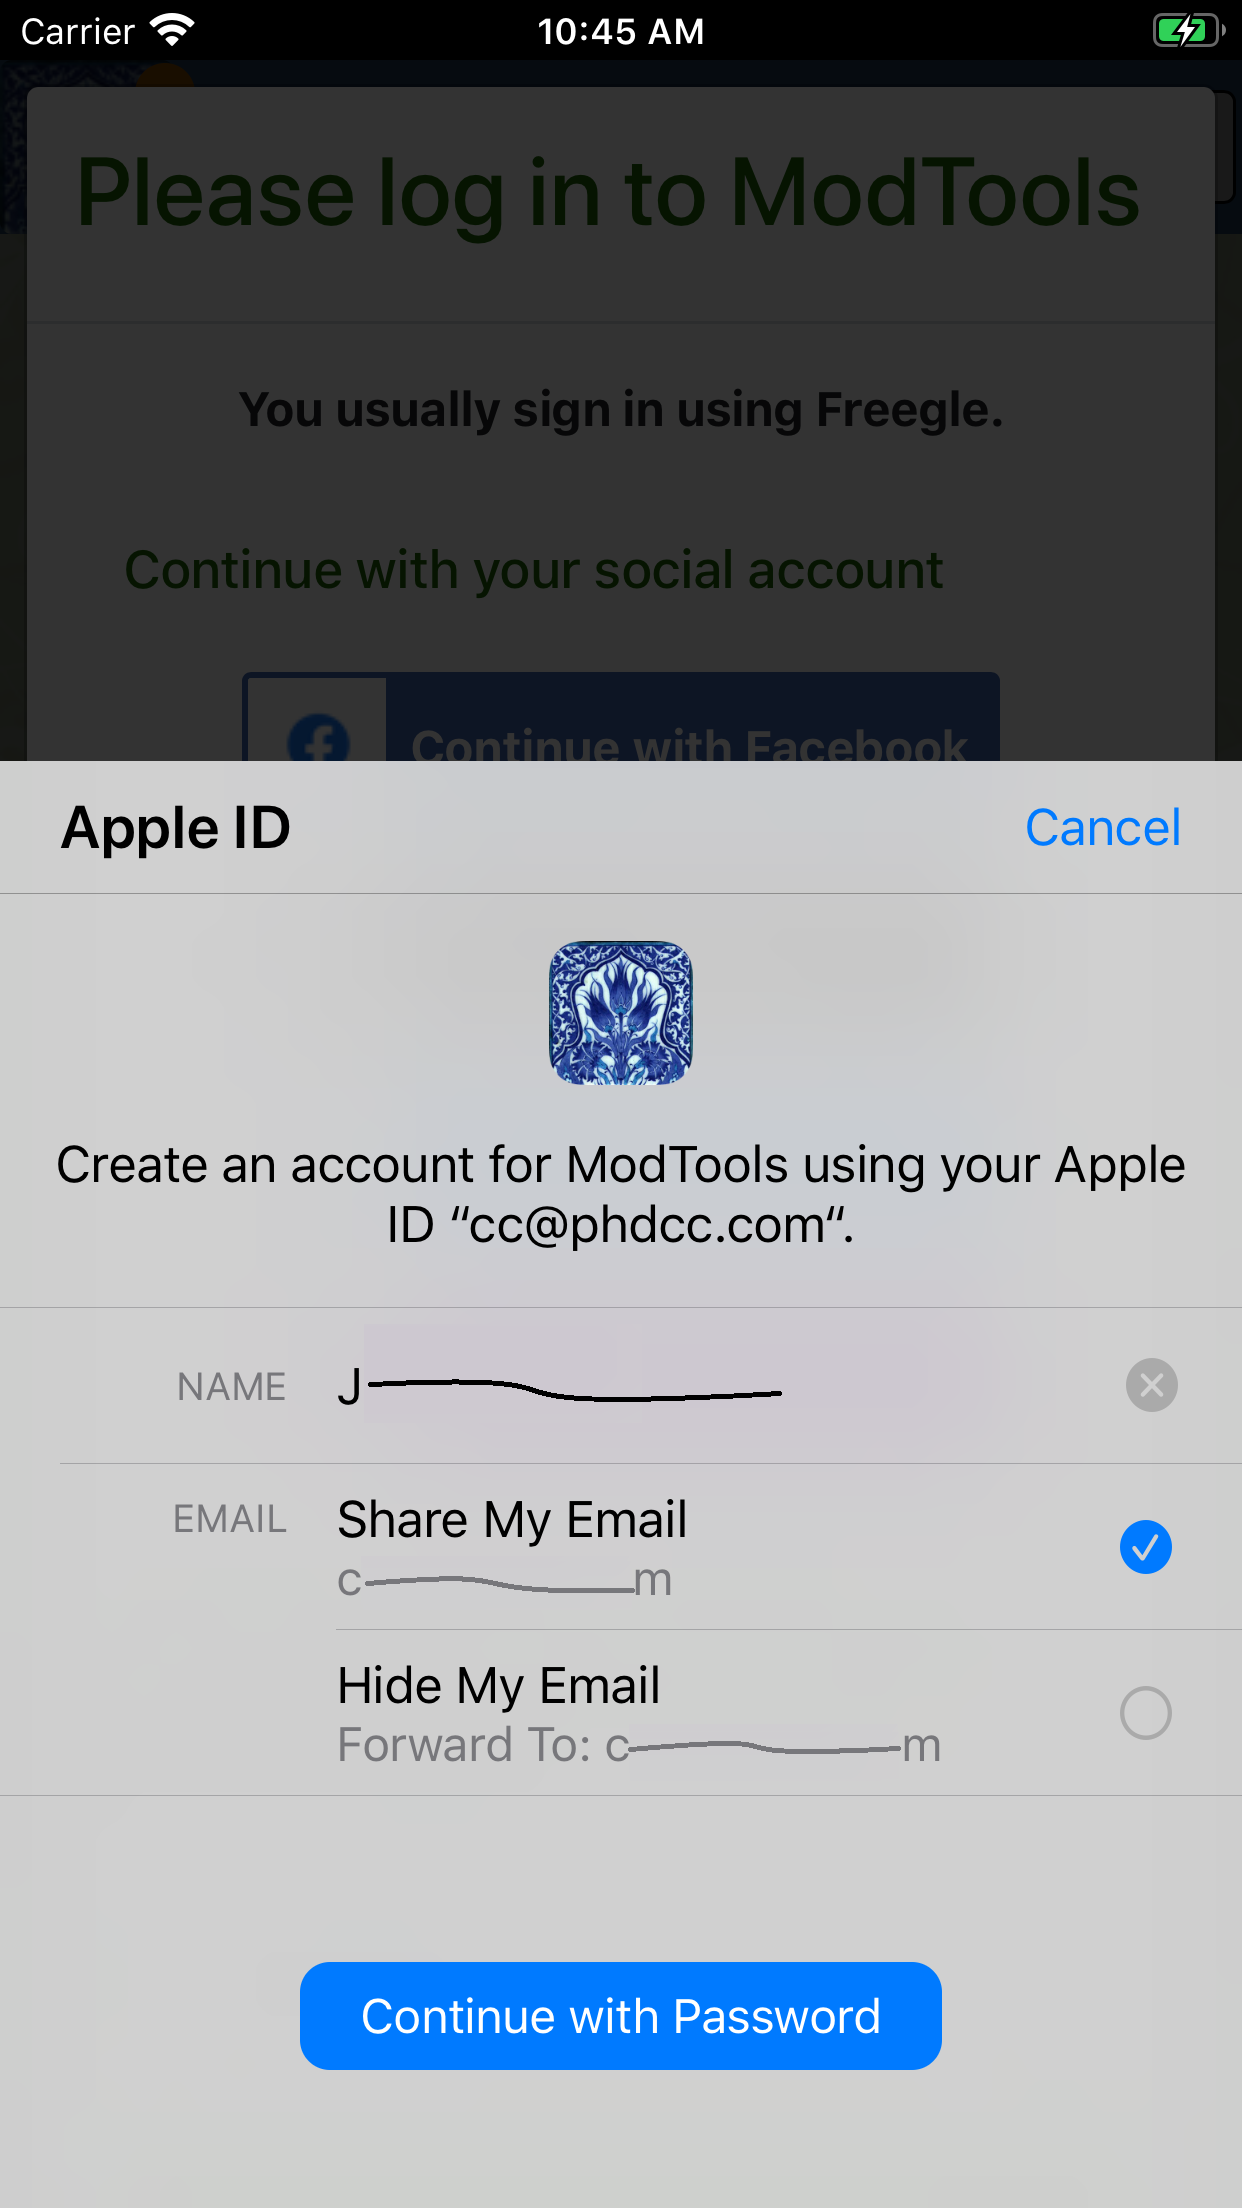 Choose whether to share or hide your email address